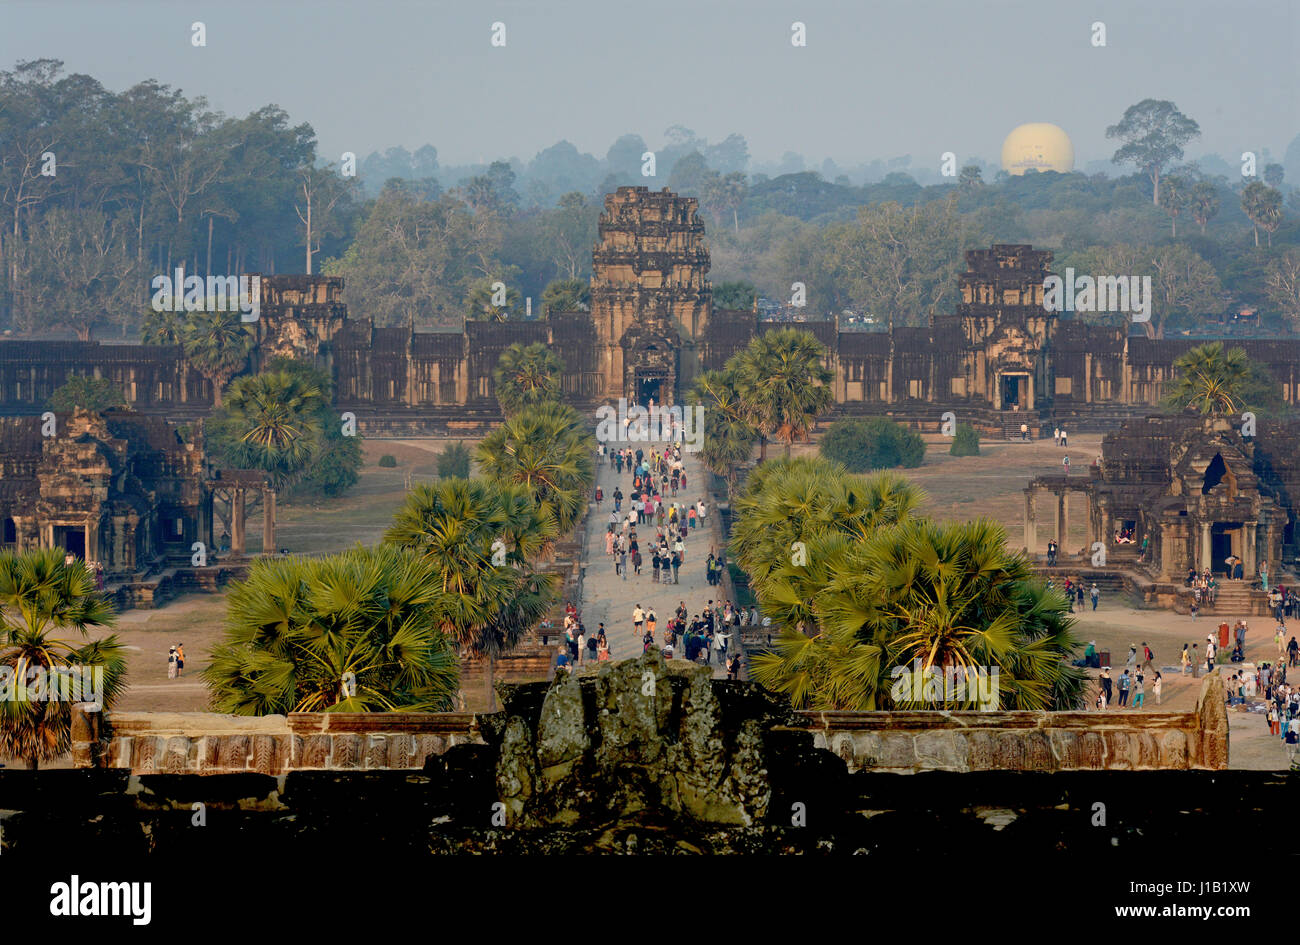 Tourists arriving to visit the religious monument of Angkor Wat by way of the causeway, in Siem Reap, Cambodia. Stock Photo